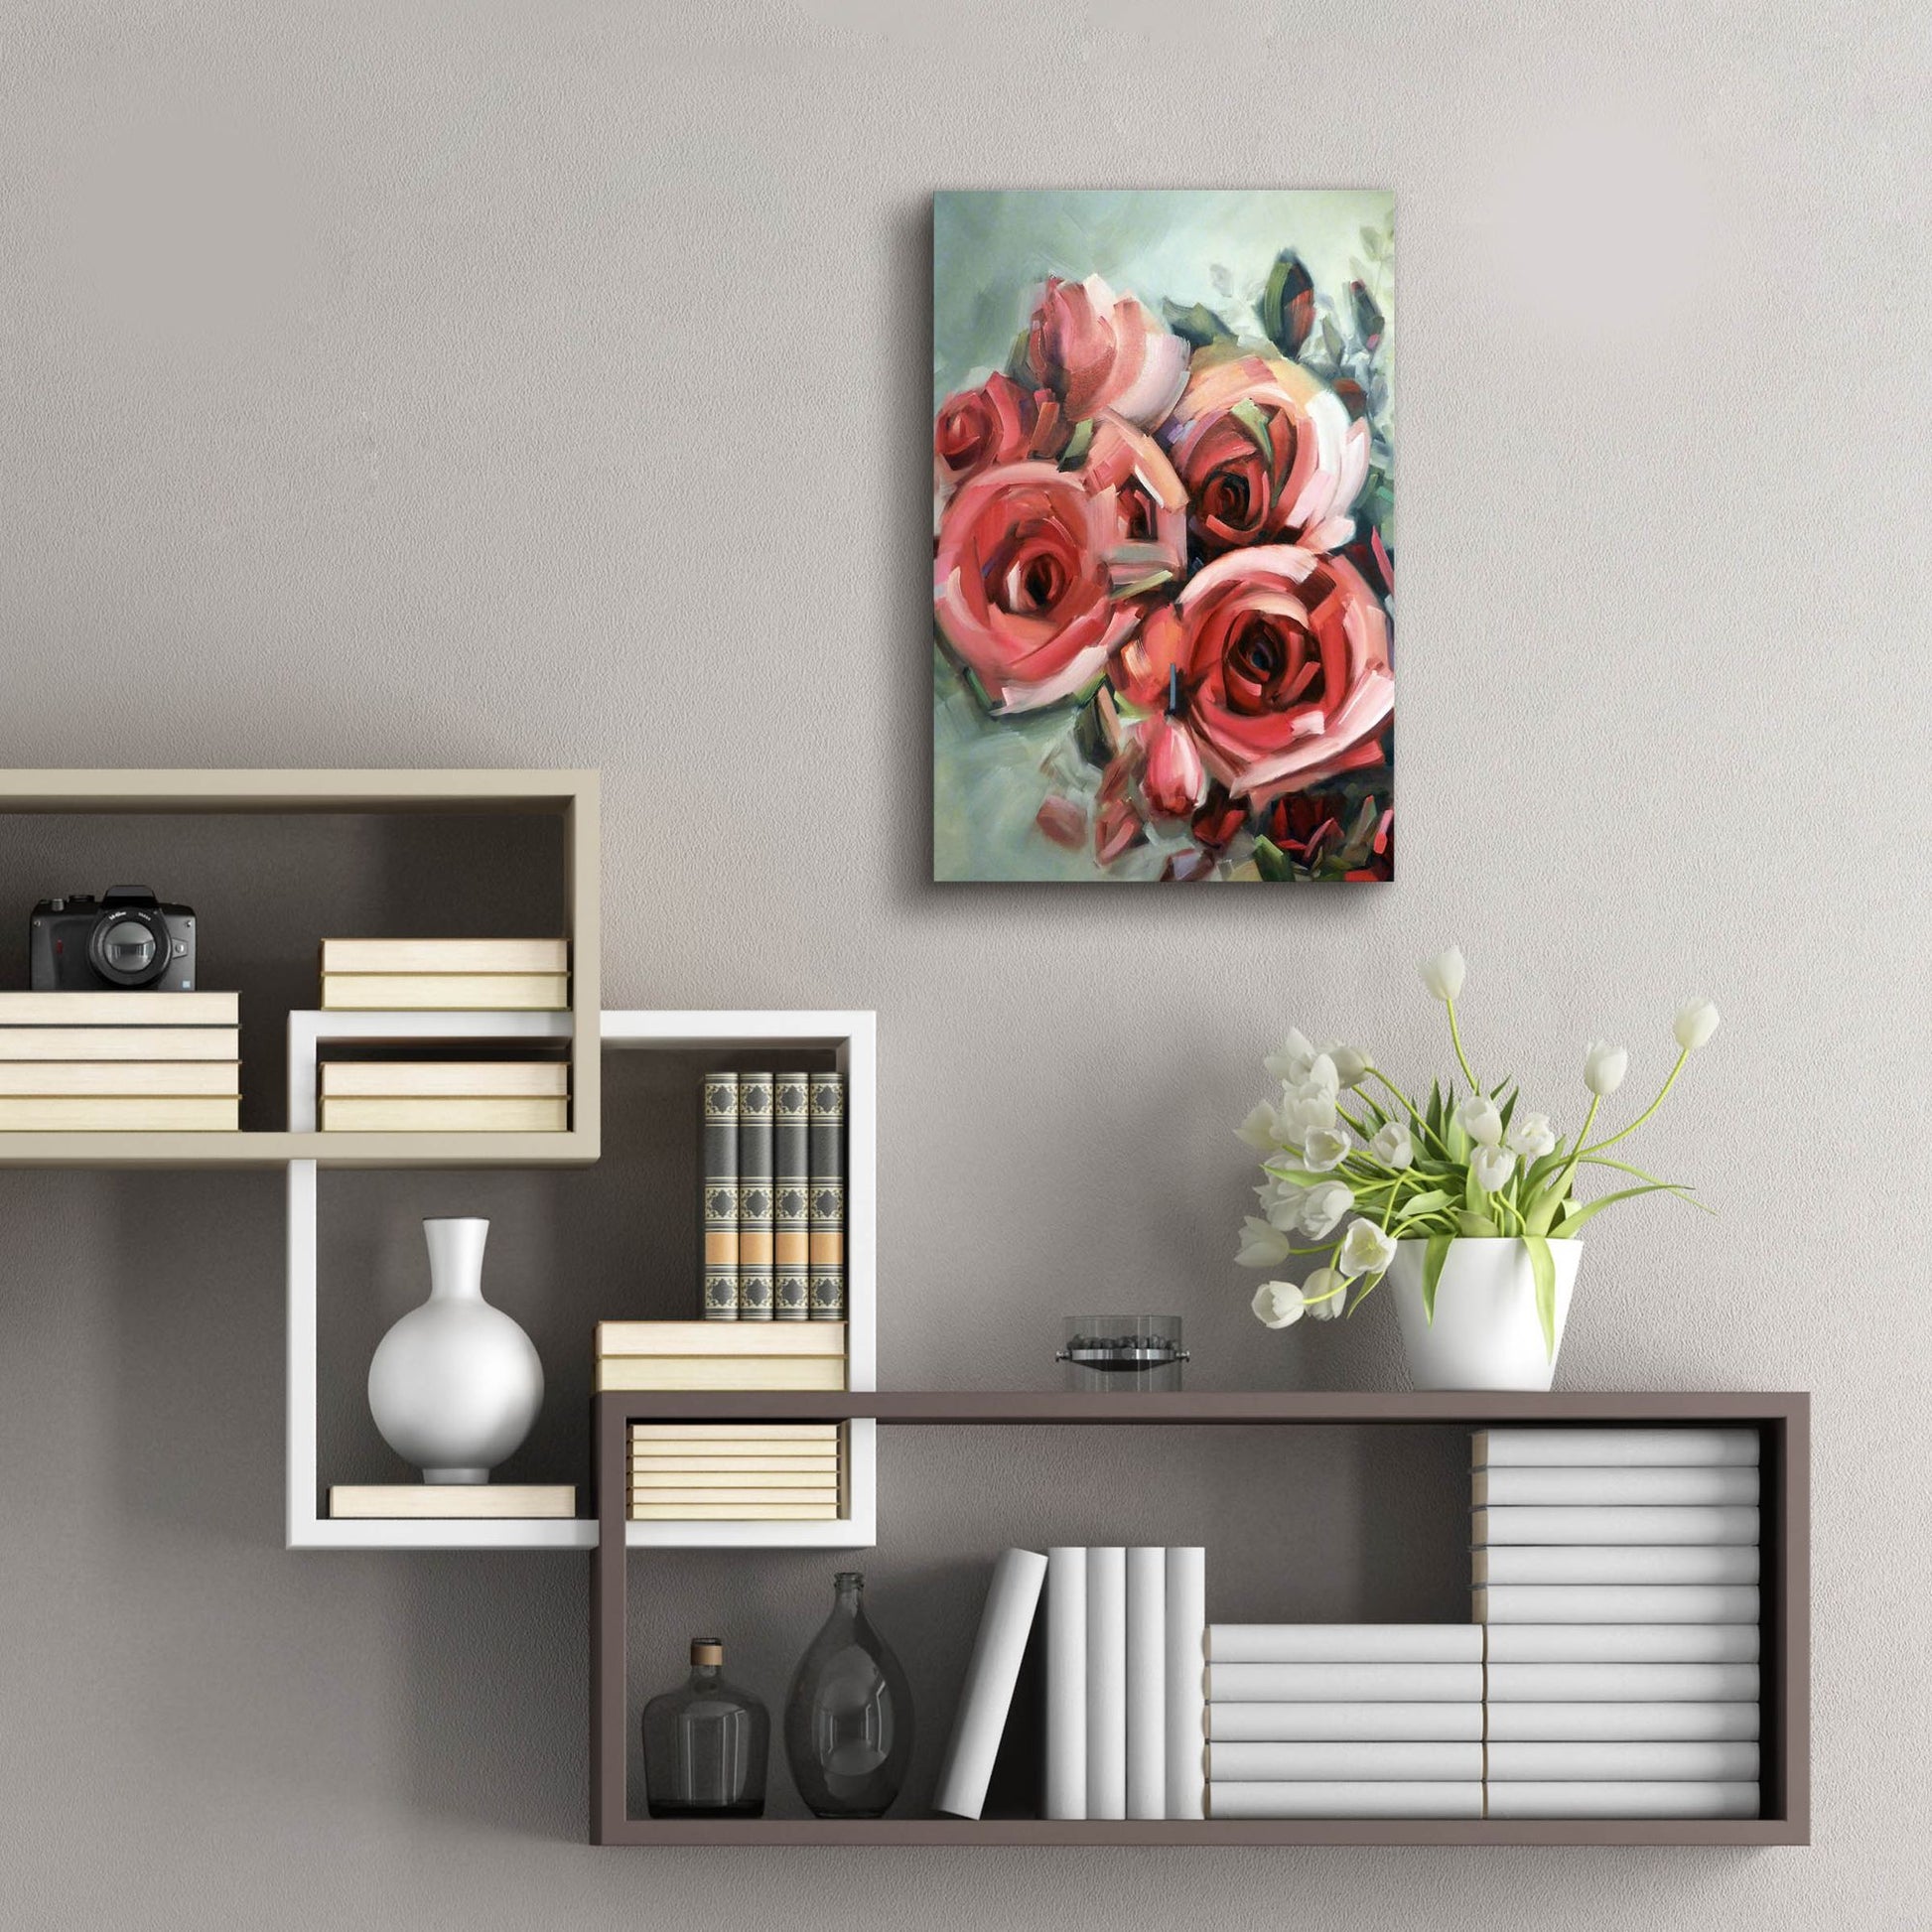 Epic Art 'Amid Scent Of Roses' by Holly Van Hart, Acrylic Glass Wall Art,16x24